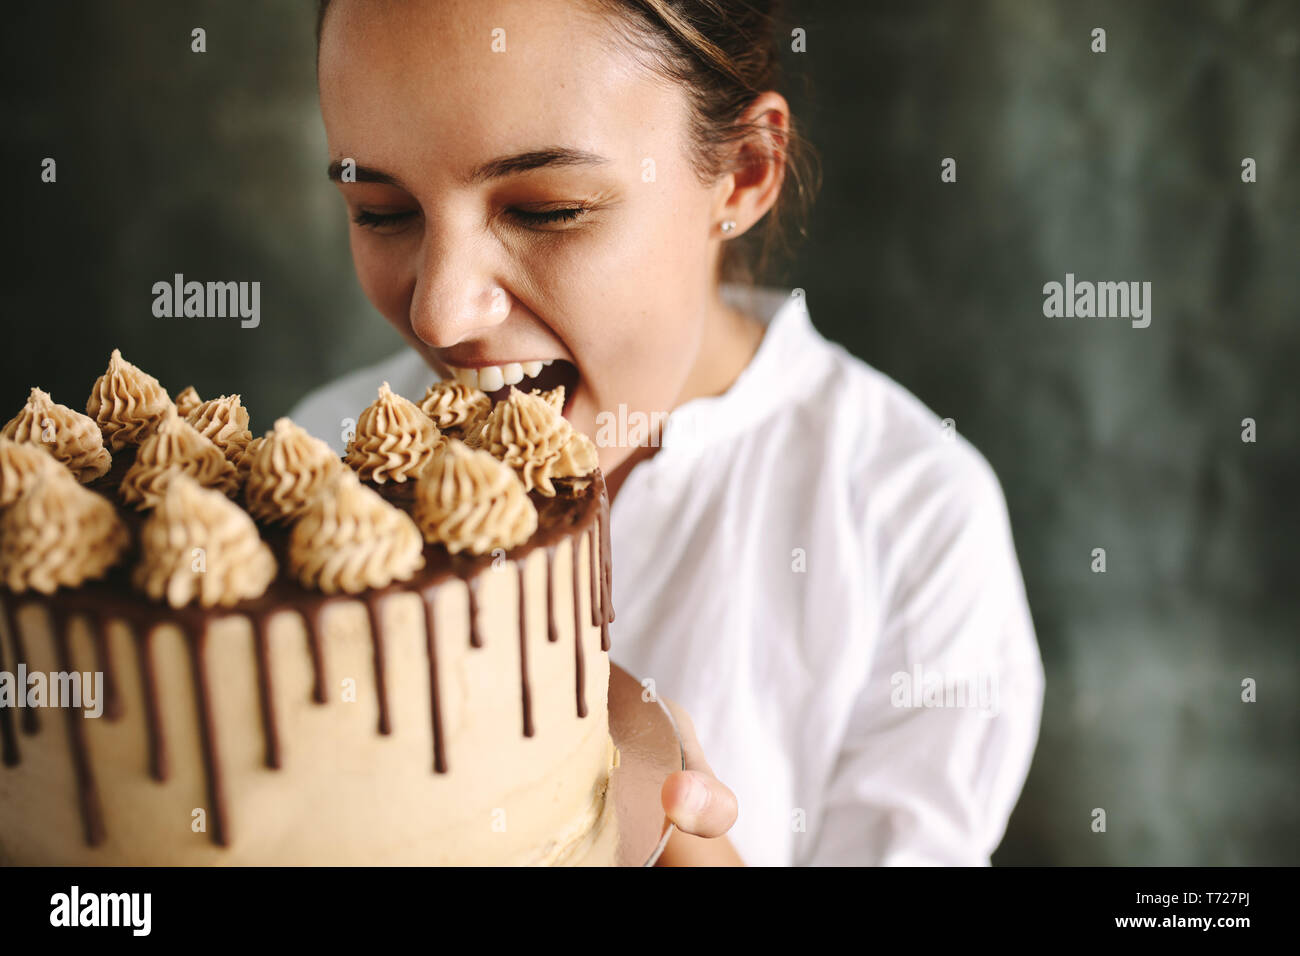 Female confectioner eating whole cake. Woman chef holding a big cake in hand and taking a bite. Stock Photo